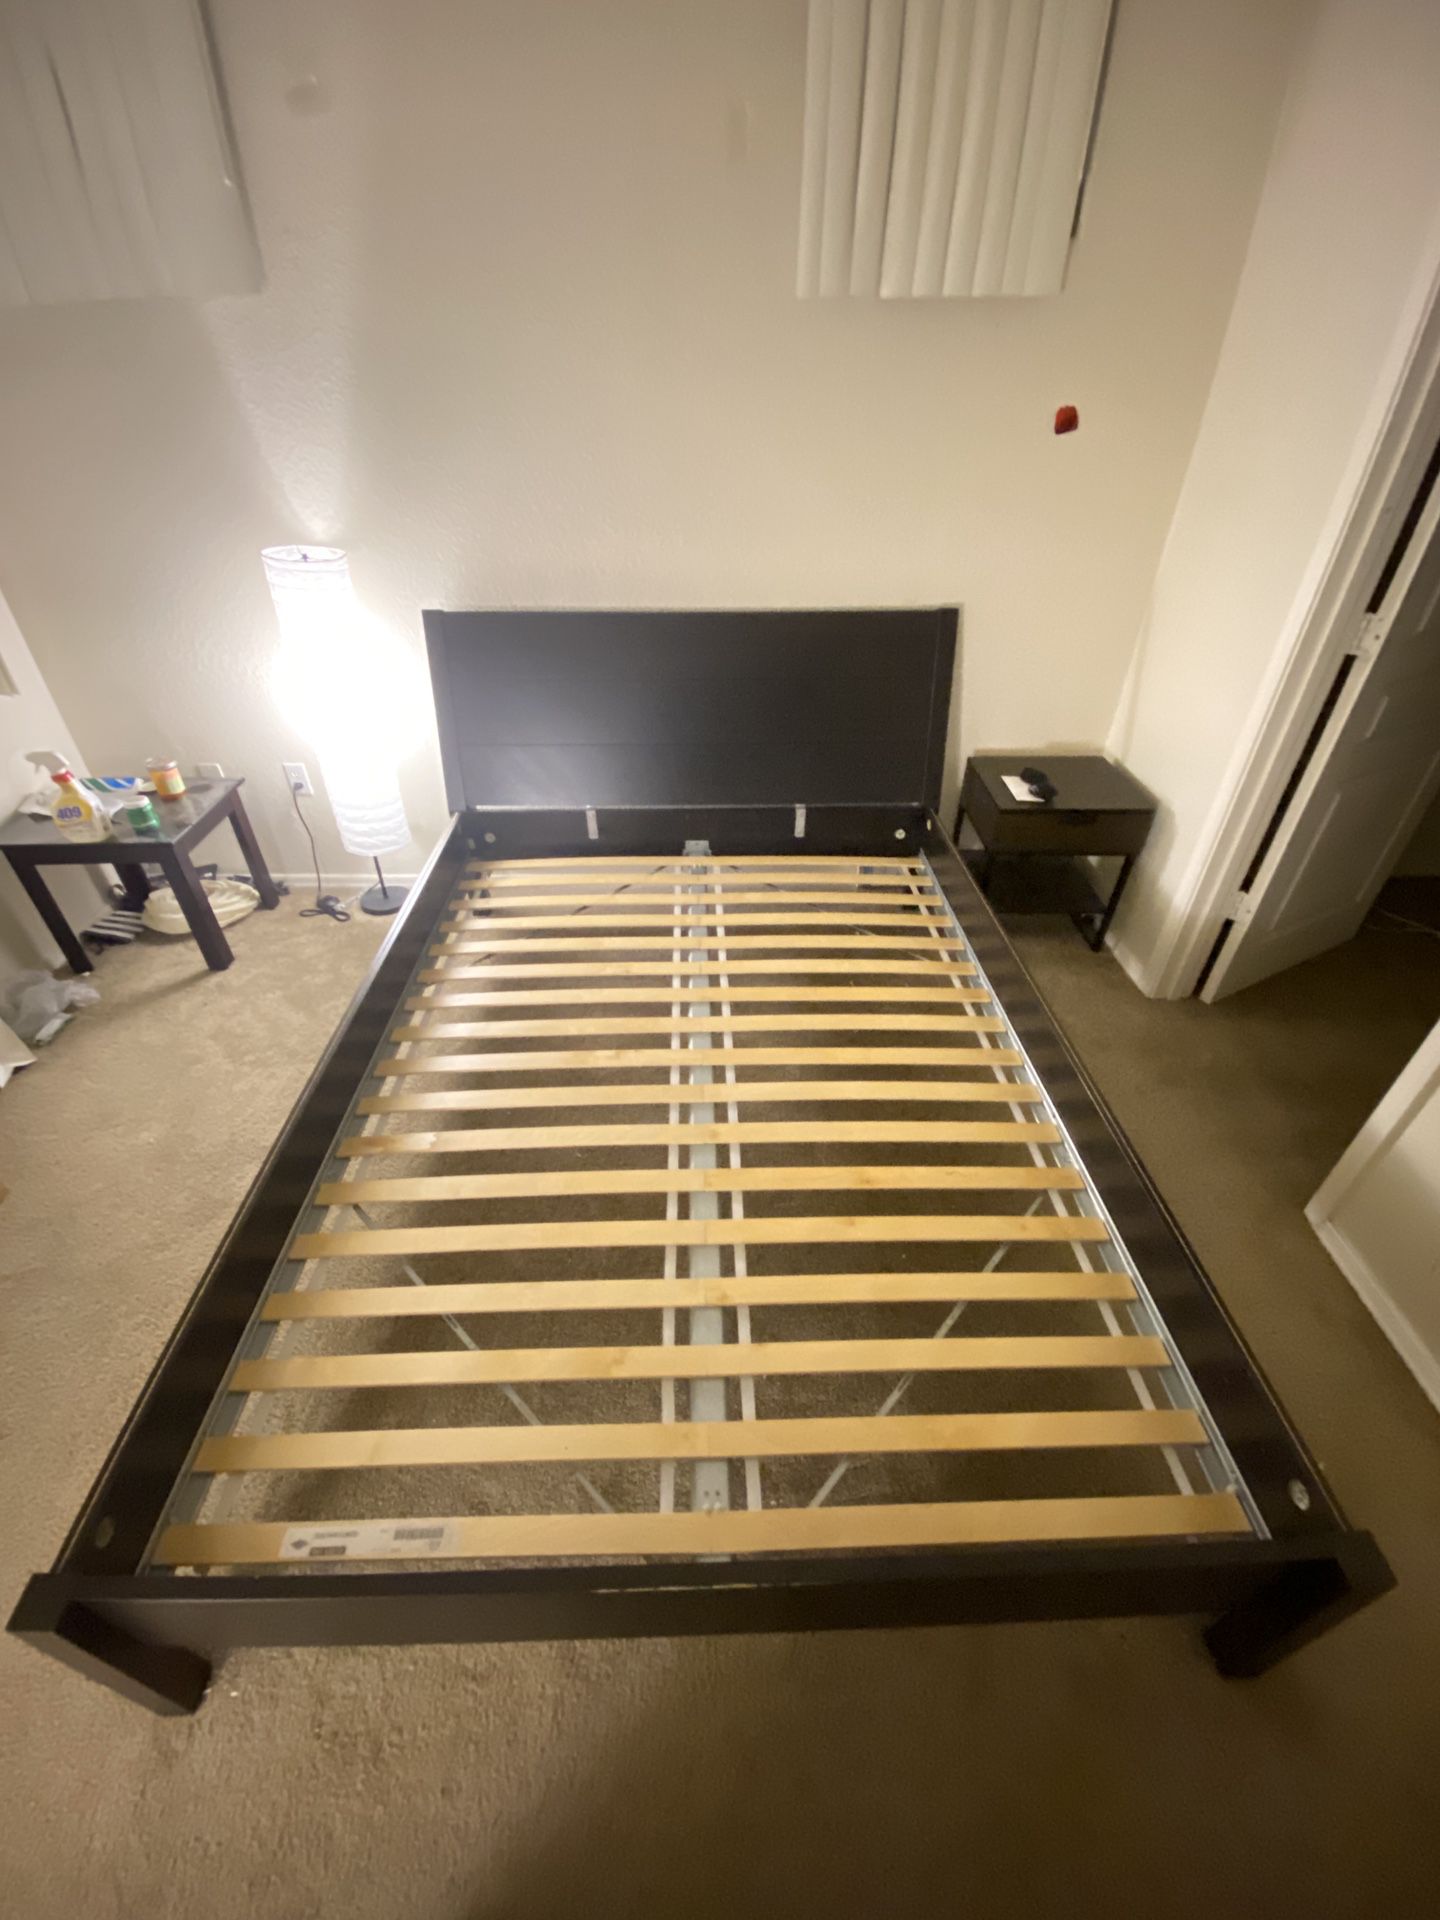 IKEA Queen size bed frame with nightstand